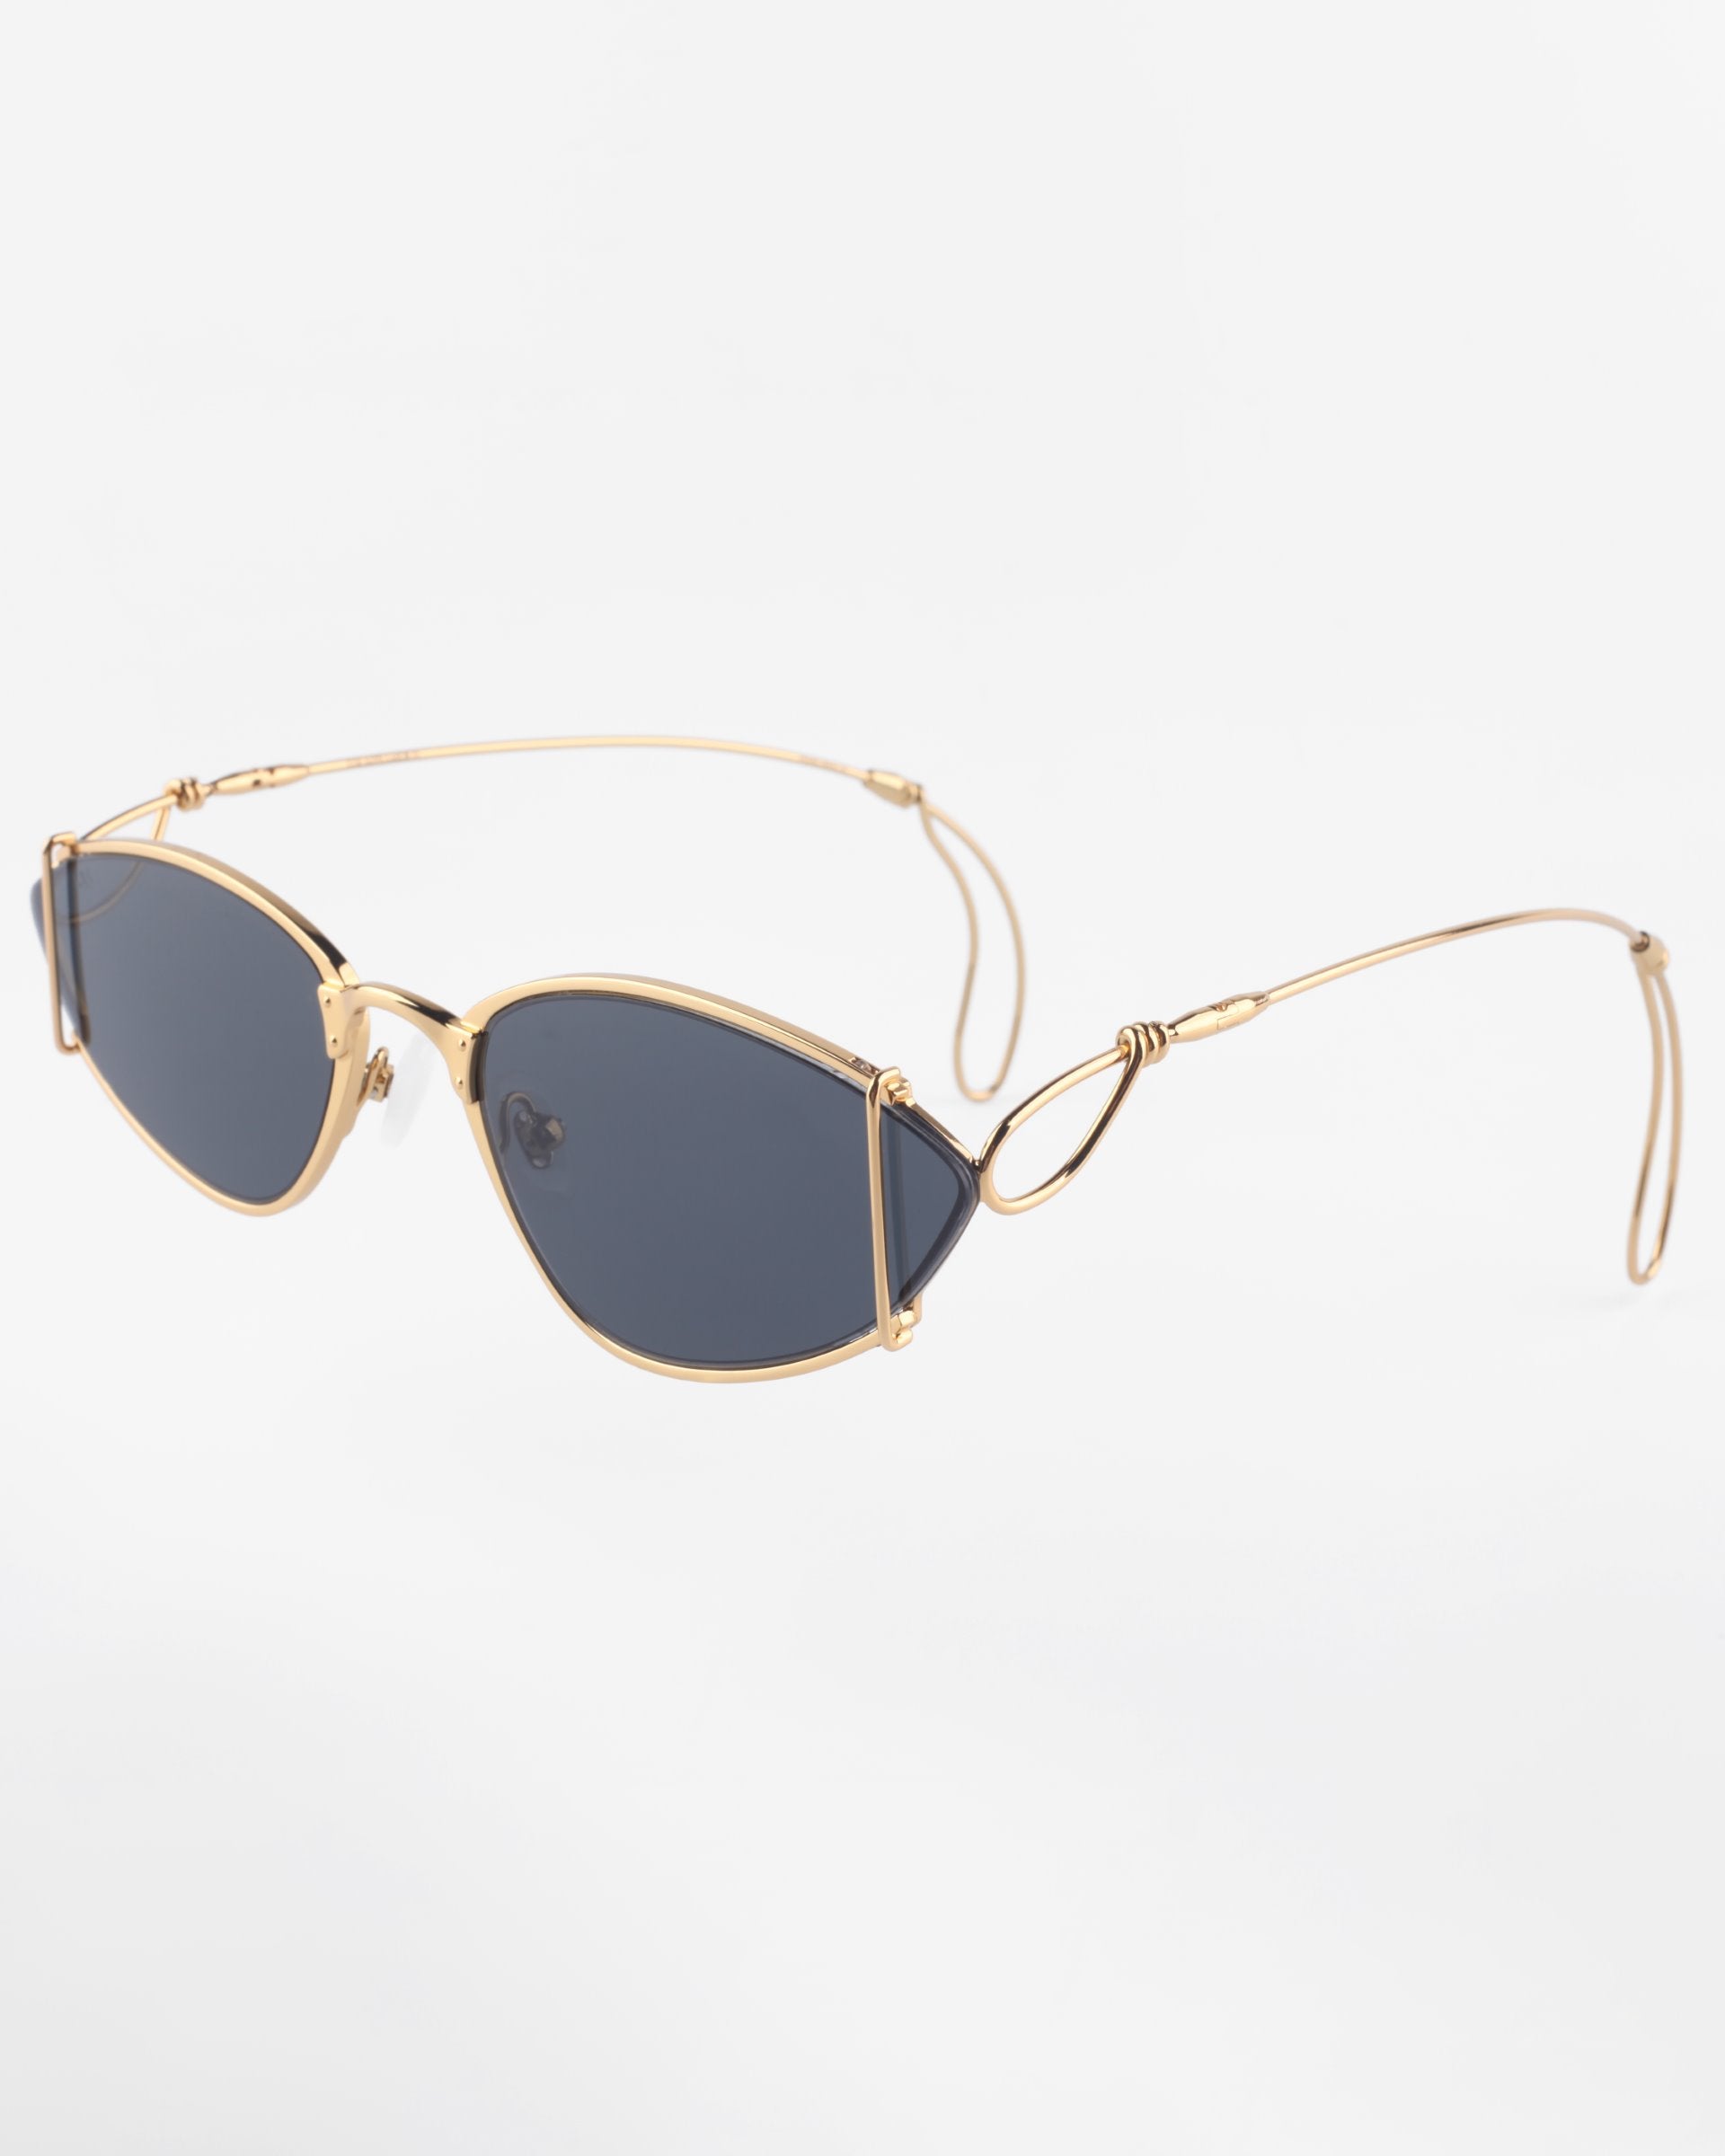 A pair of sleek, gold-plated stainless steel sunglasses with dark, narrow oval lenses and thin, wire-like arms. The minimalist design, 100% UVA &amp; UVB protection, and anti-reflective coating give these Ornate sunglasses by For Art&#39;s Sake® a modern, stylish appearance against a plain white background.